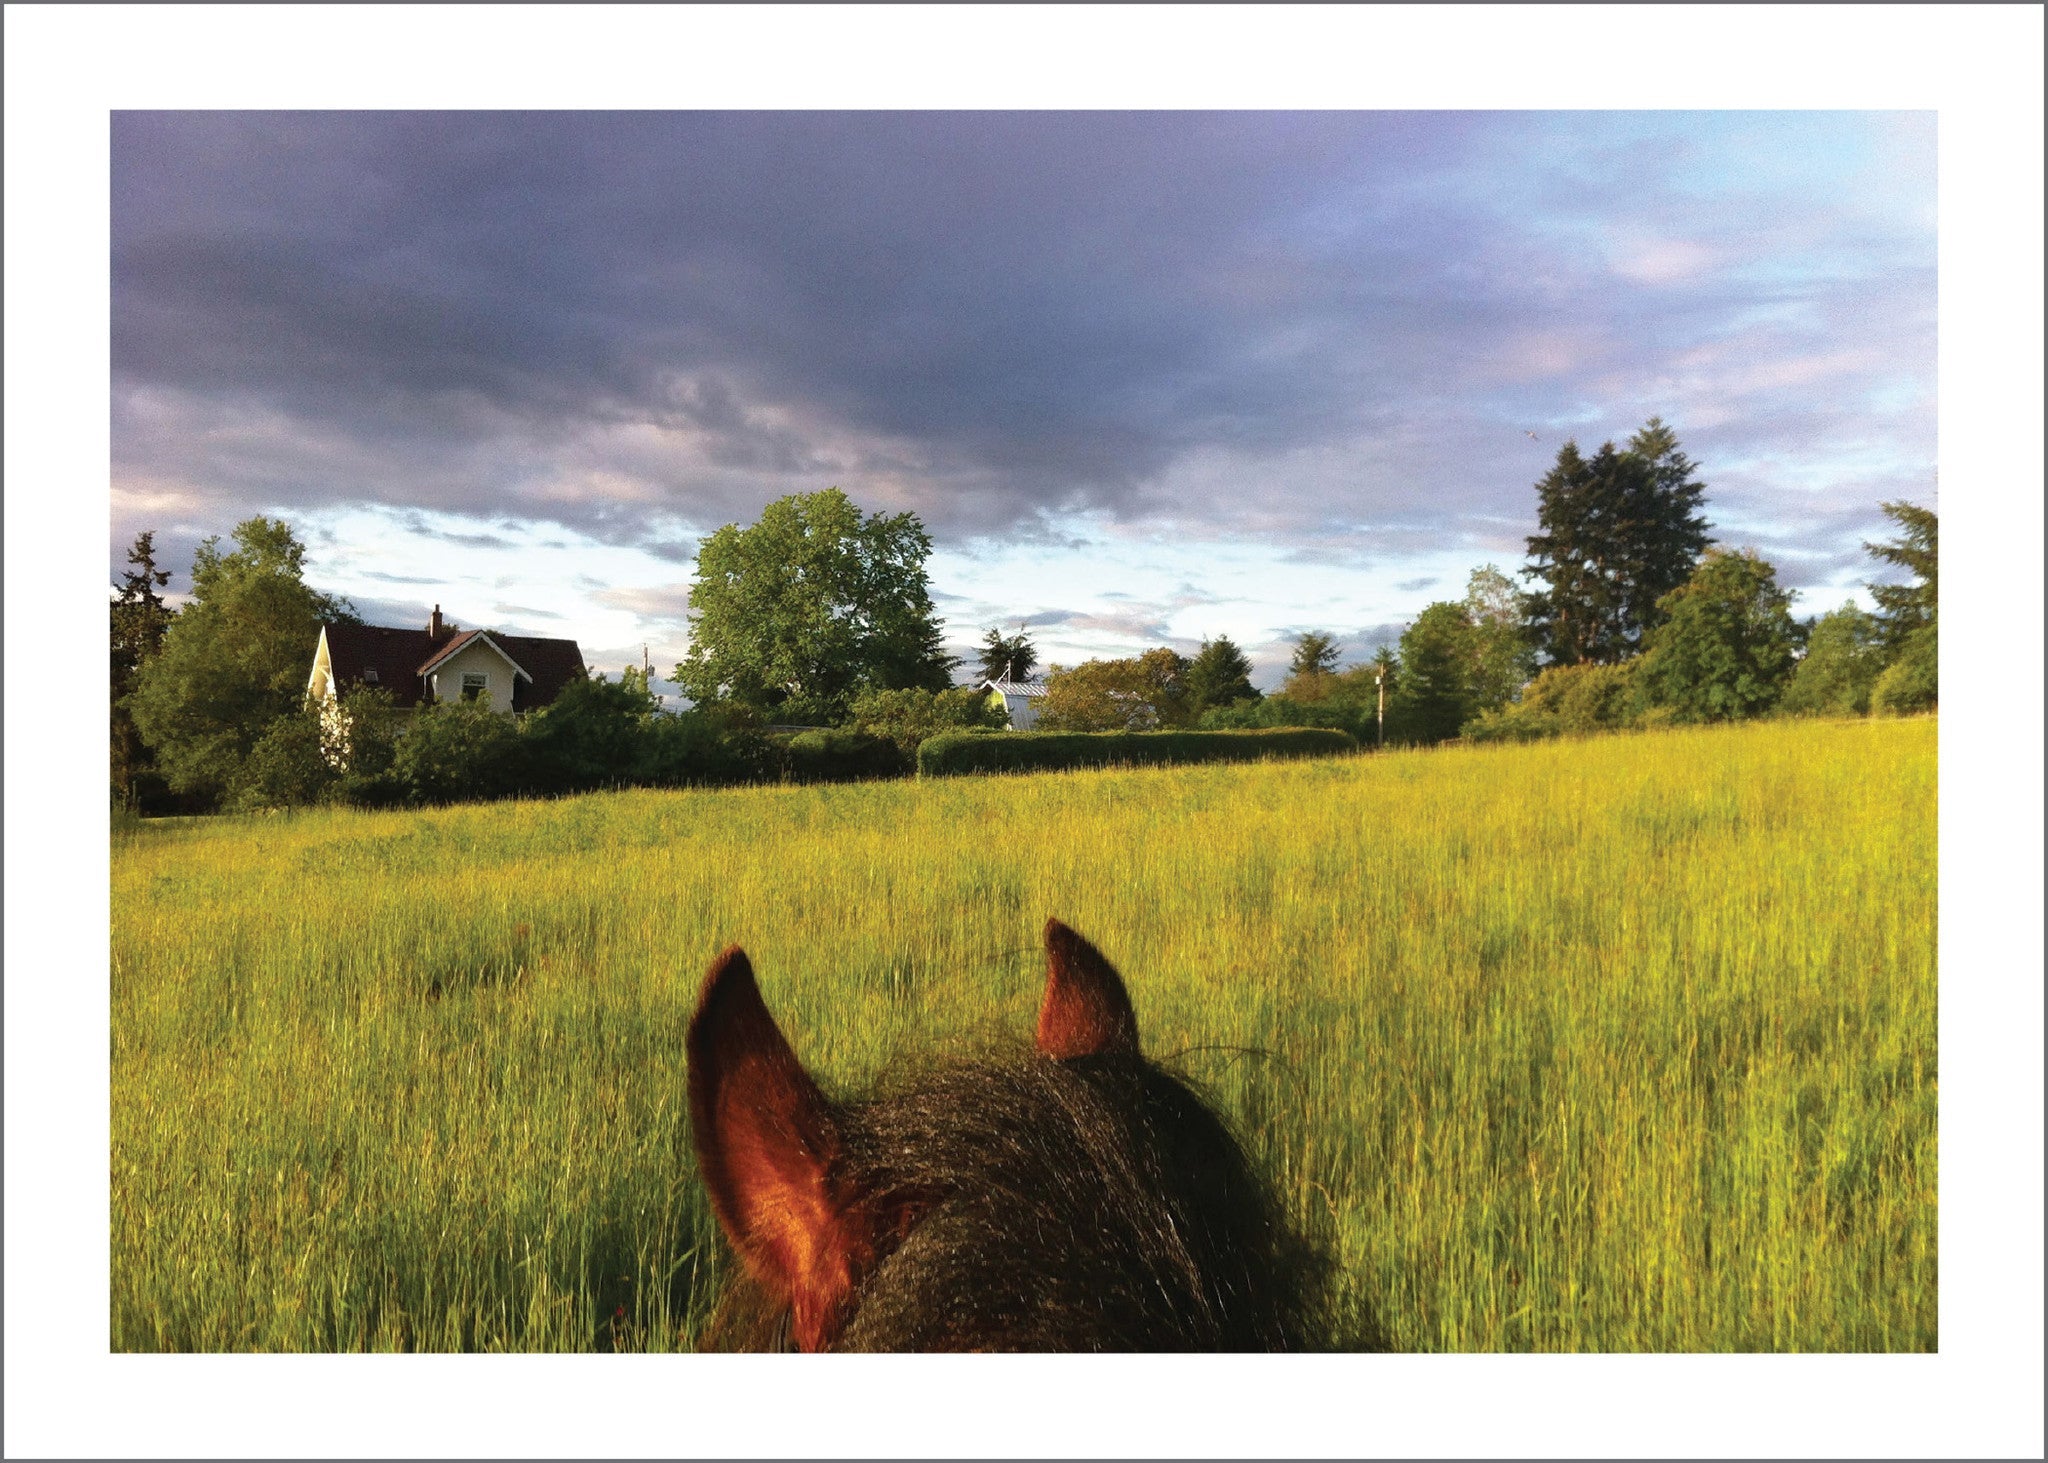 Life Between the Ears: The World from a Saddle (Vashon Island)